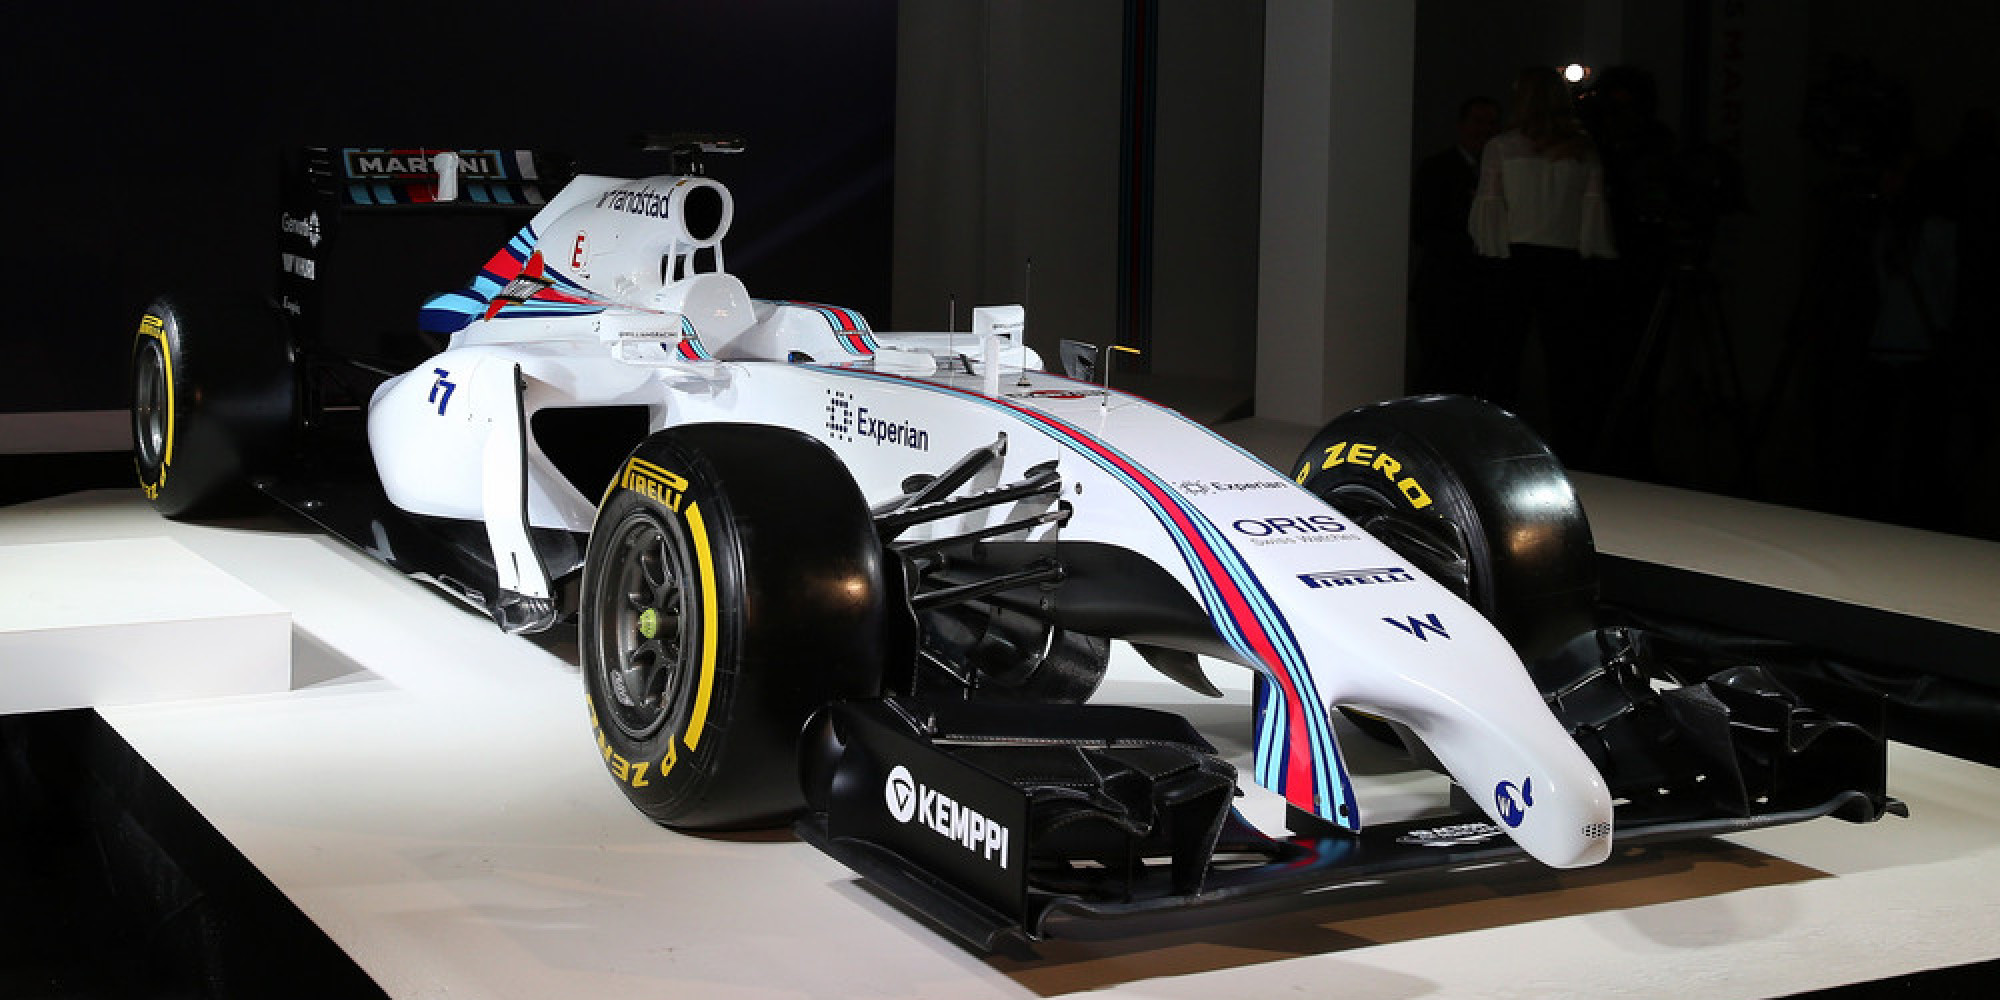 Williams F1 Revives Iconic Livery With Martini Sponsorship (VIDEO, PHOTOS)